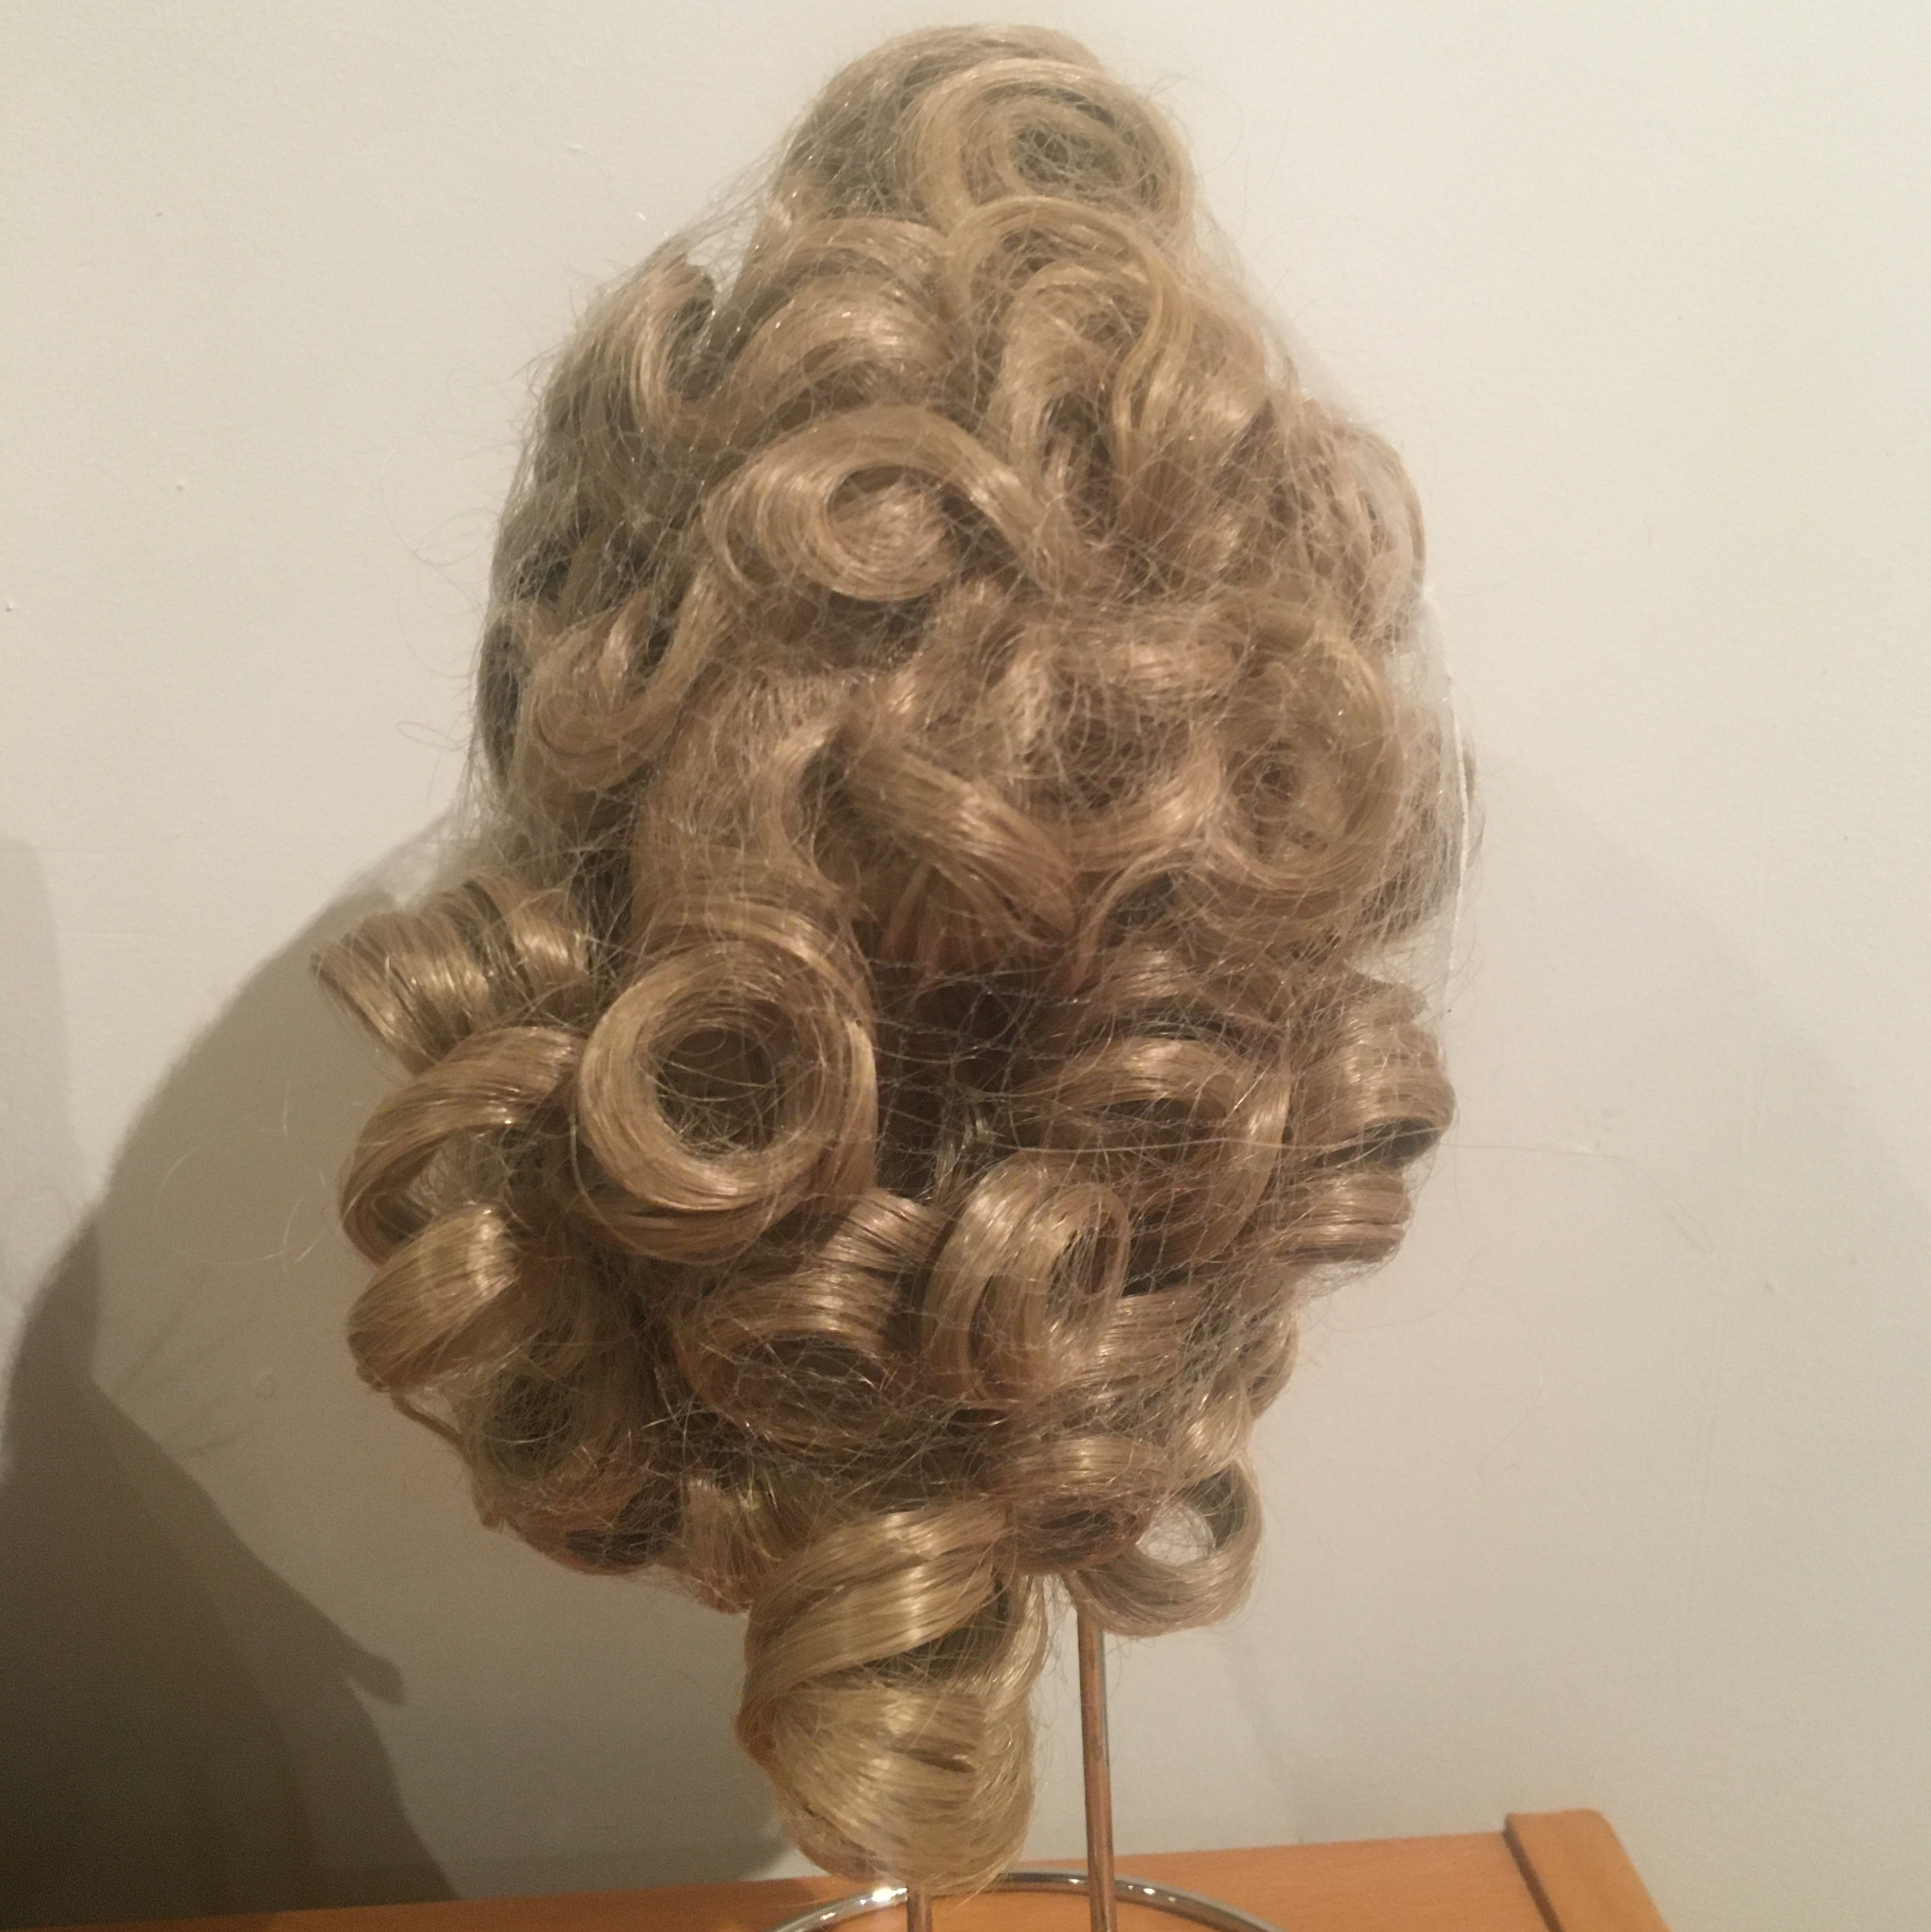 Back of blond wig, medium-length with large curls. Several curls protrude through a hole in a hair net